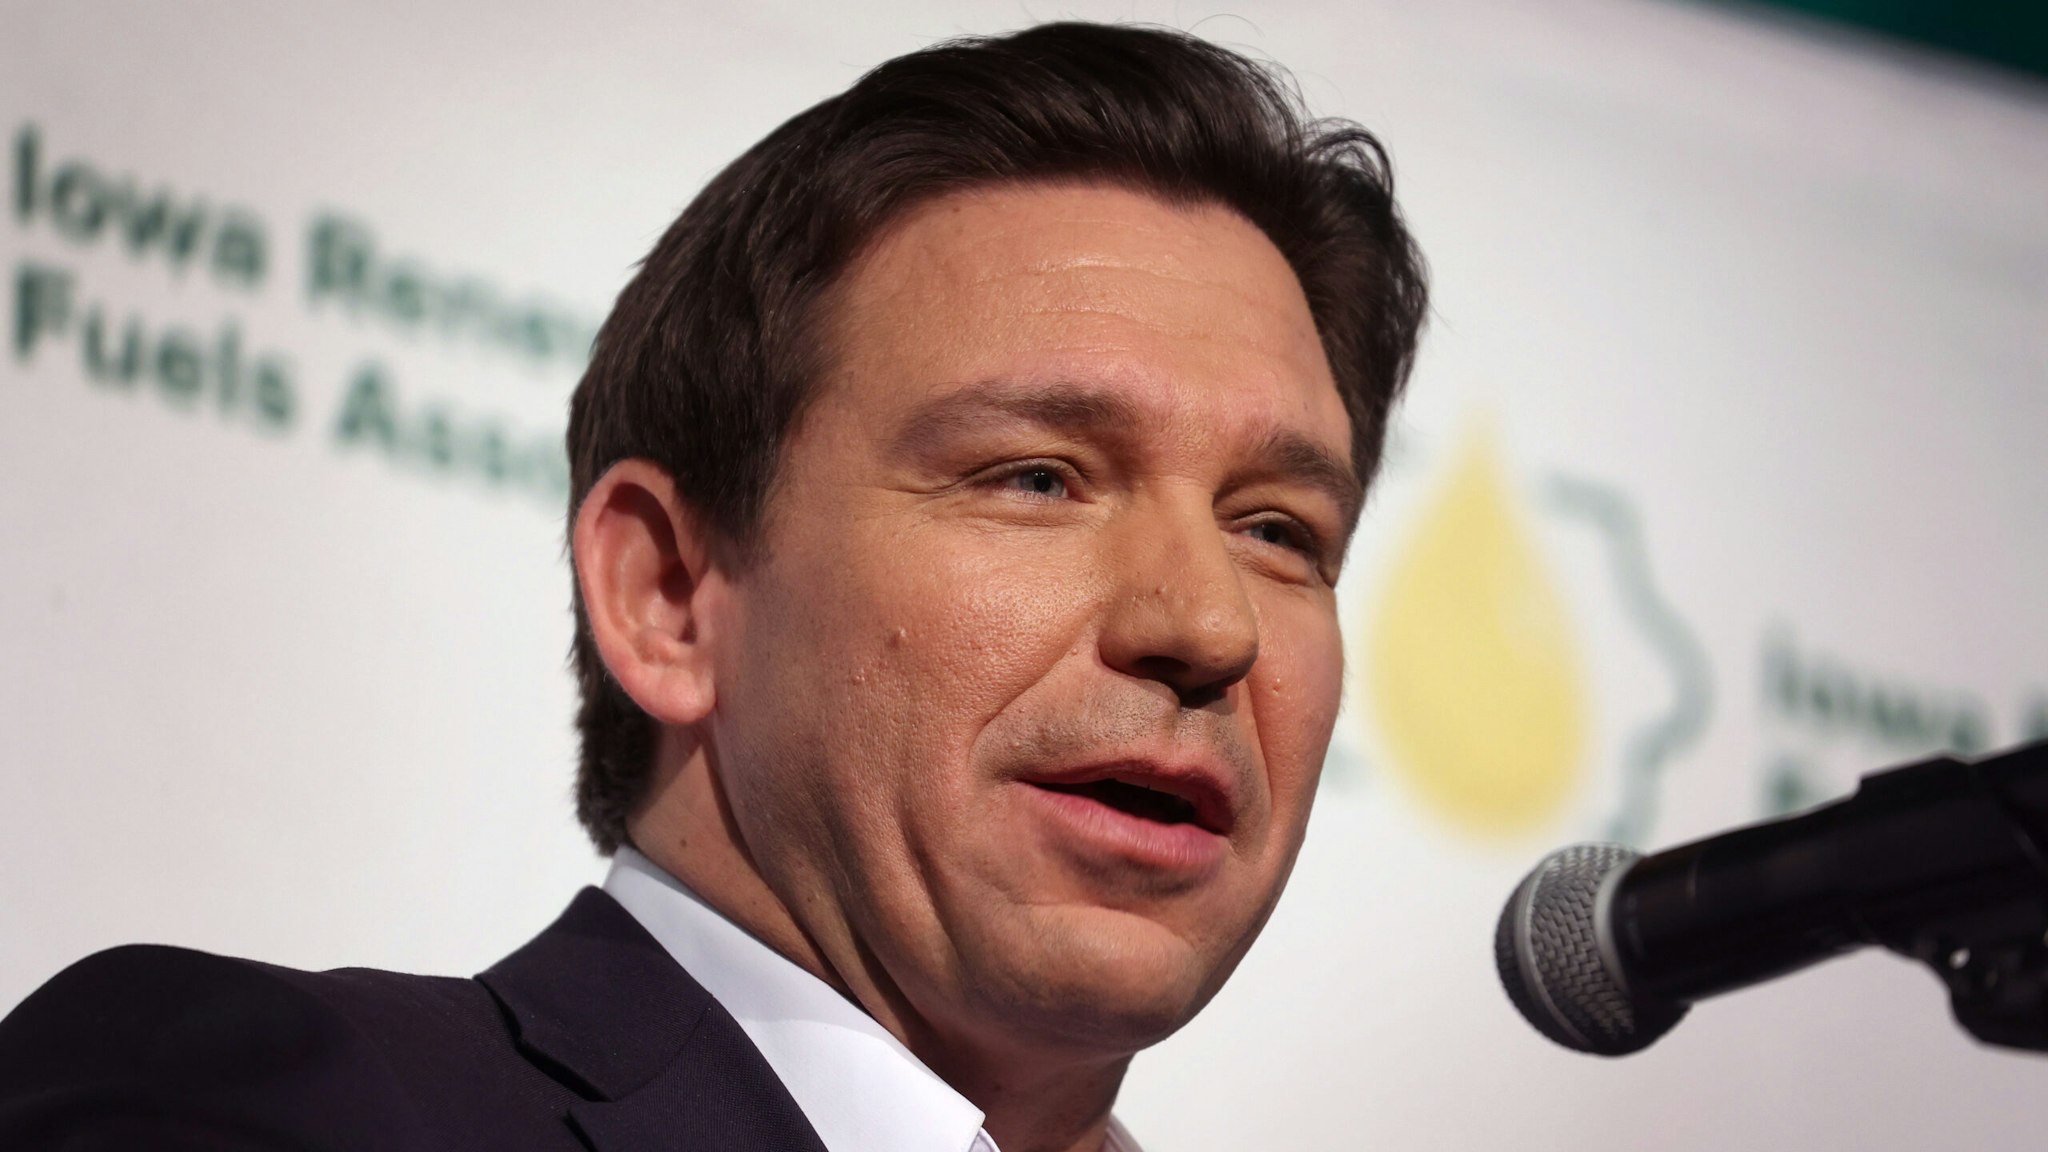 ALTOONA, IOWA - JANUARY 11: Republican presidential candidate Florida Governor Ron DeSantis speaks at the 2024 Iowa Renewable Fuels Summit on January 11, 2024 in Altoona, Iowa. Iowa Republicans will be the first to select their party's nomination for the 2024 presidential race when they go to caucus on January 15, 2024.